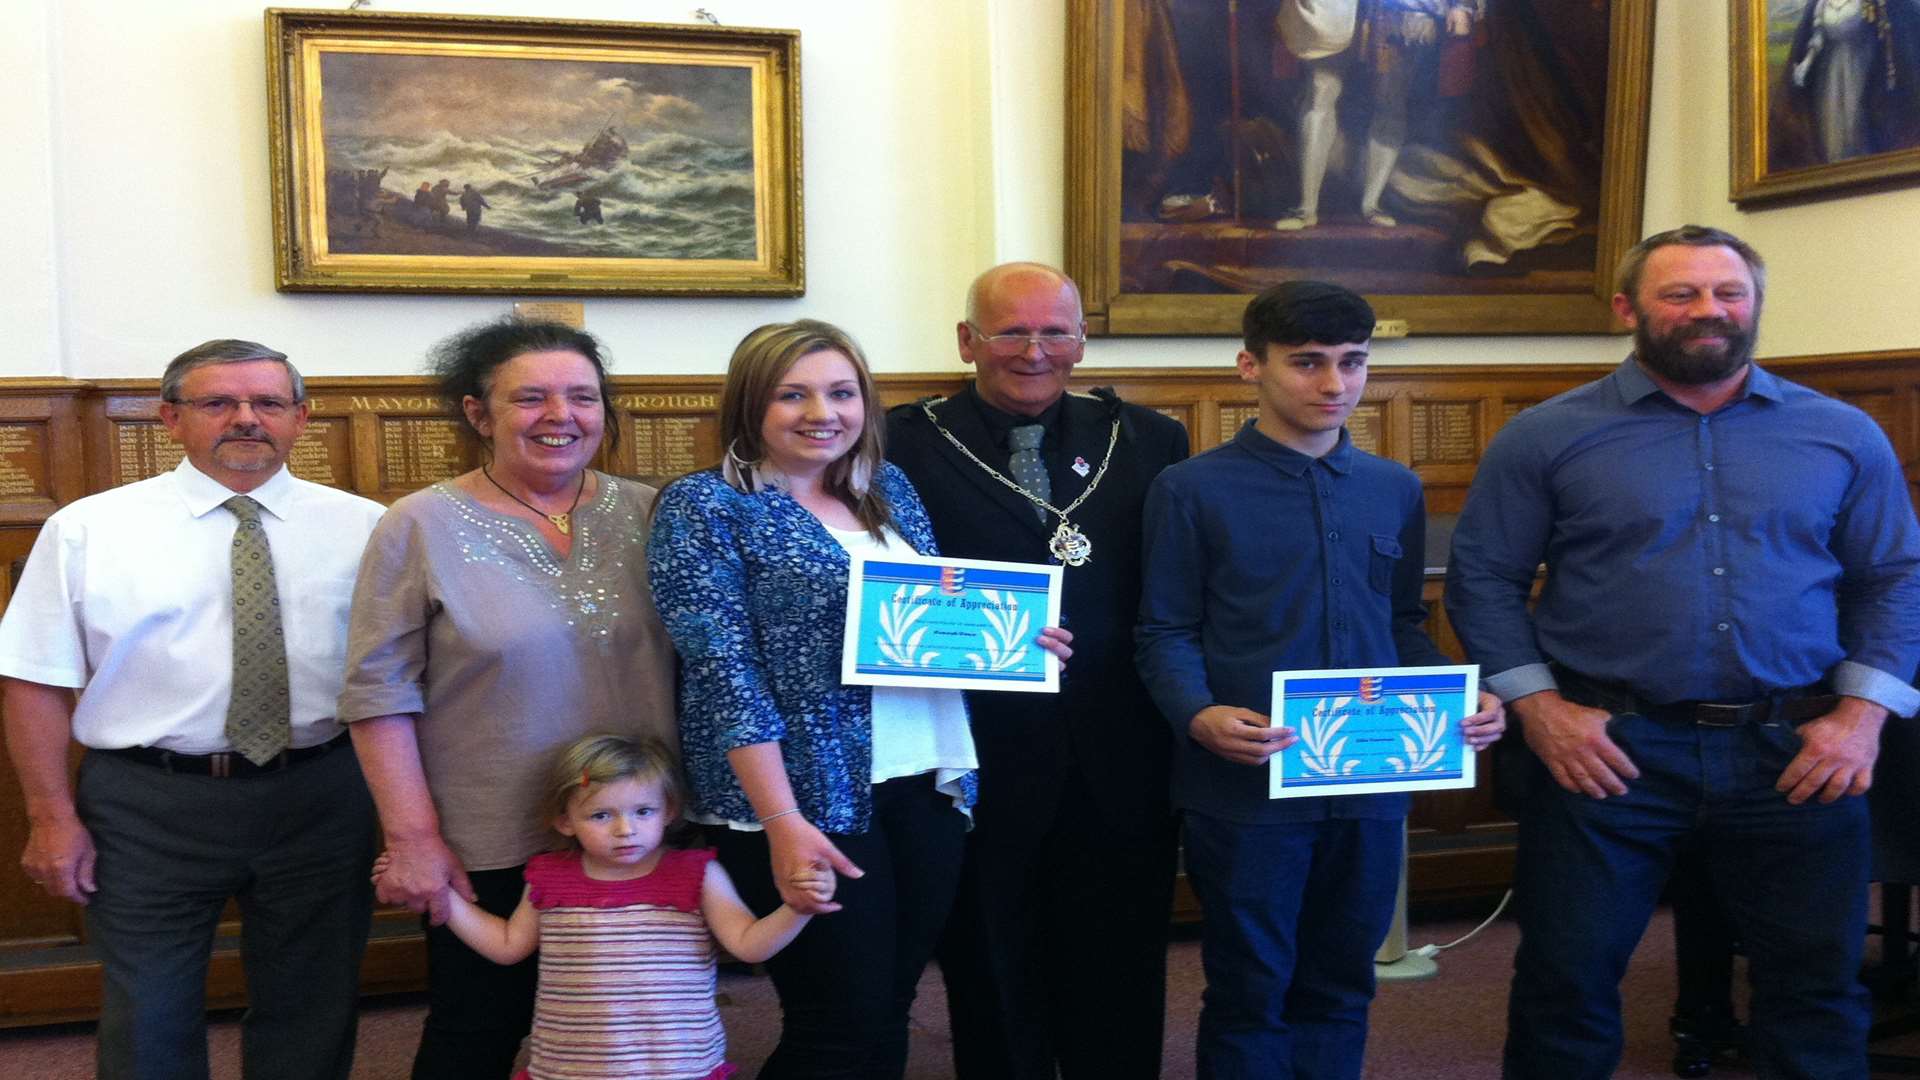 Hannah Dunn and Ellis Cureton with Deal town finance officer Paul Bone, parent Chrissi Dunn, Deal Mayor Cllr Adrian Friend, parent Carl Dunn and two-year-old Amelia Hadaway